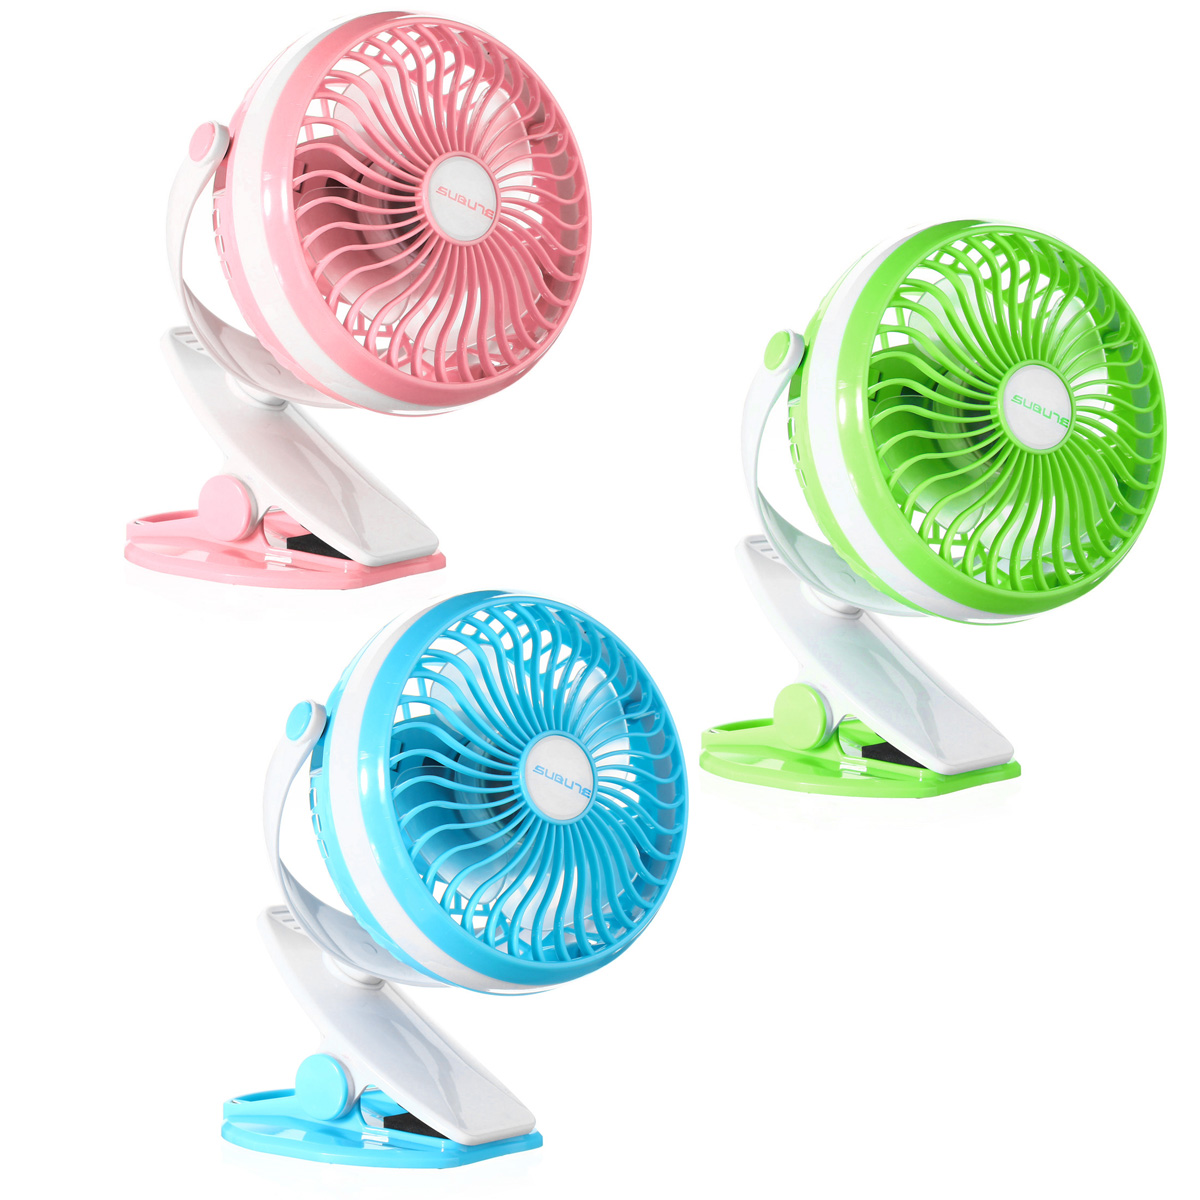 360ordm-Clip-On-Portable-Mini-USB-Baby-Carriage-Camping-Outdoor-Desktop-Office-Fan-Cooler-1154208